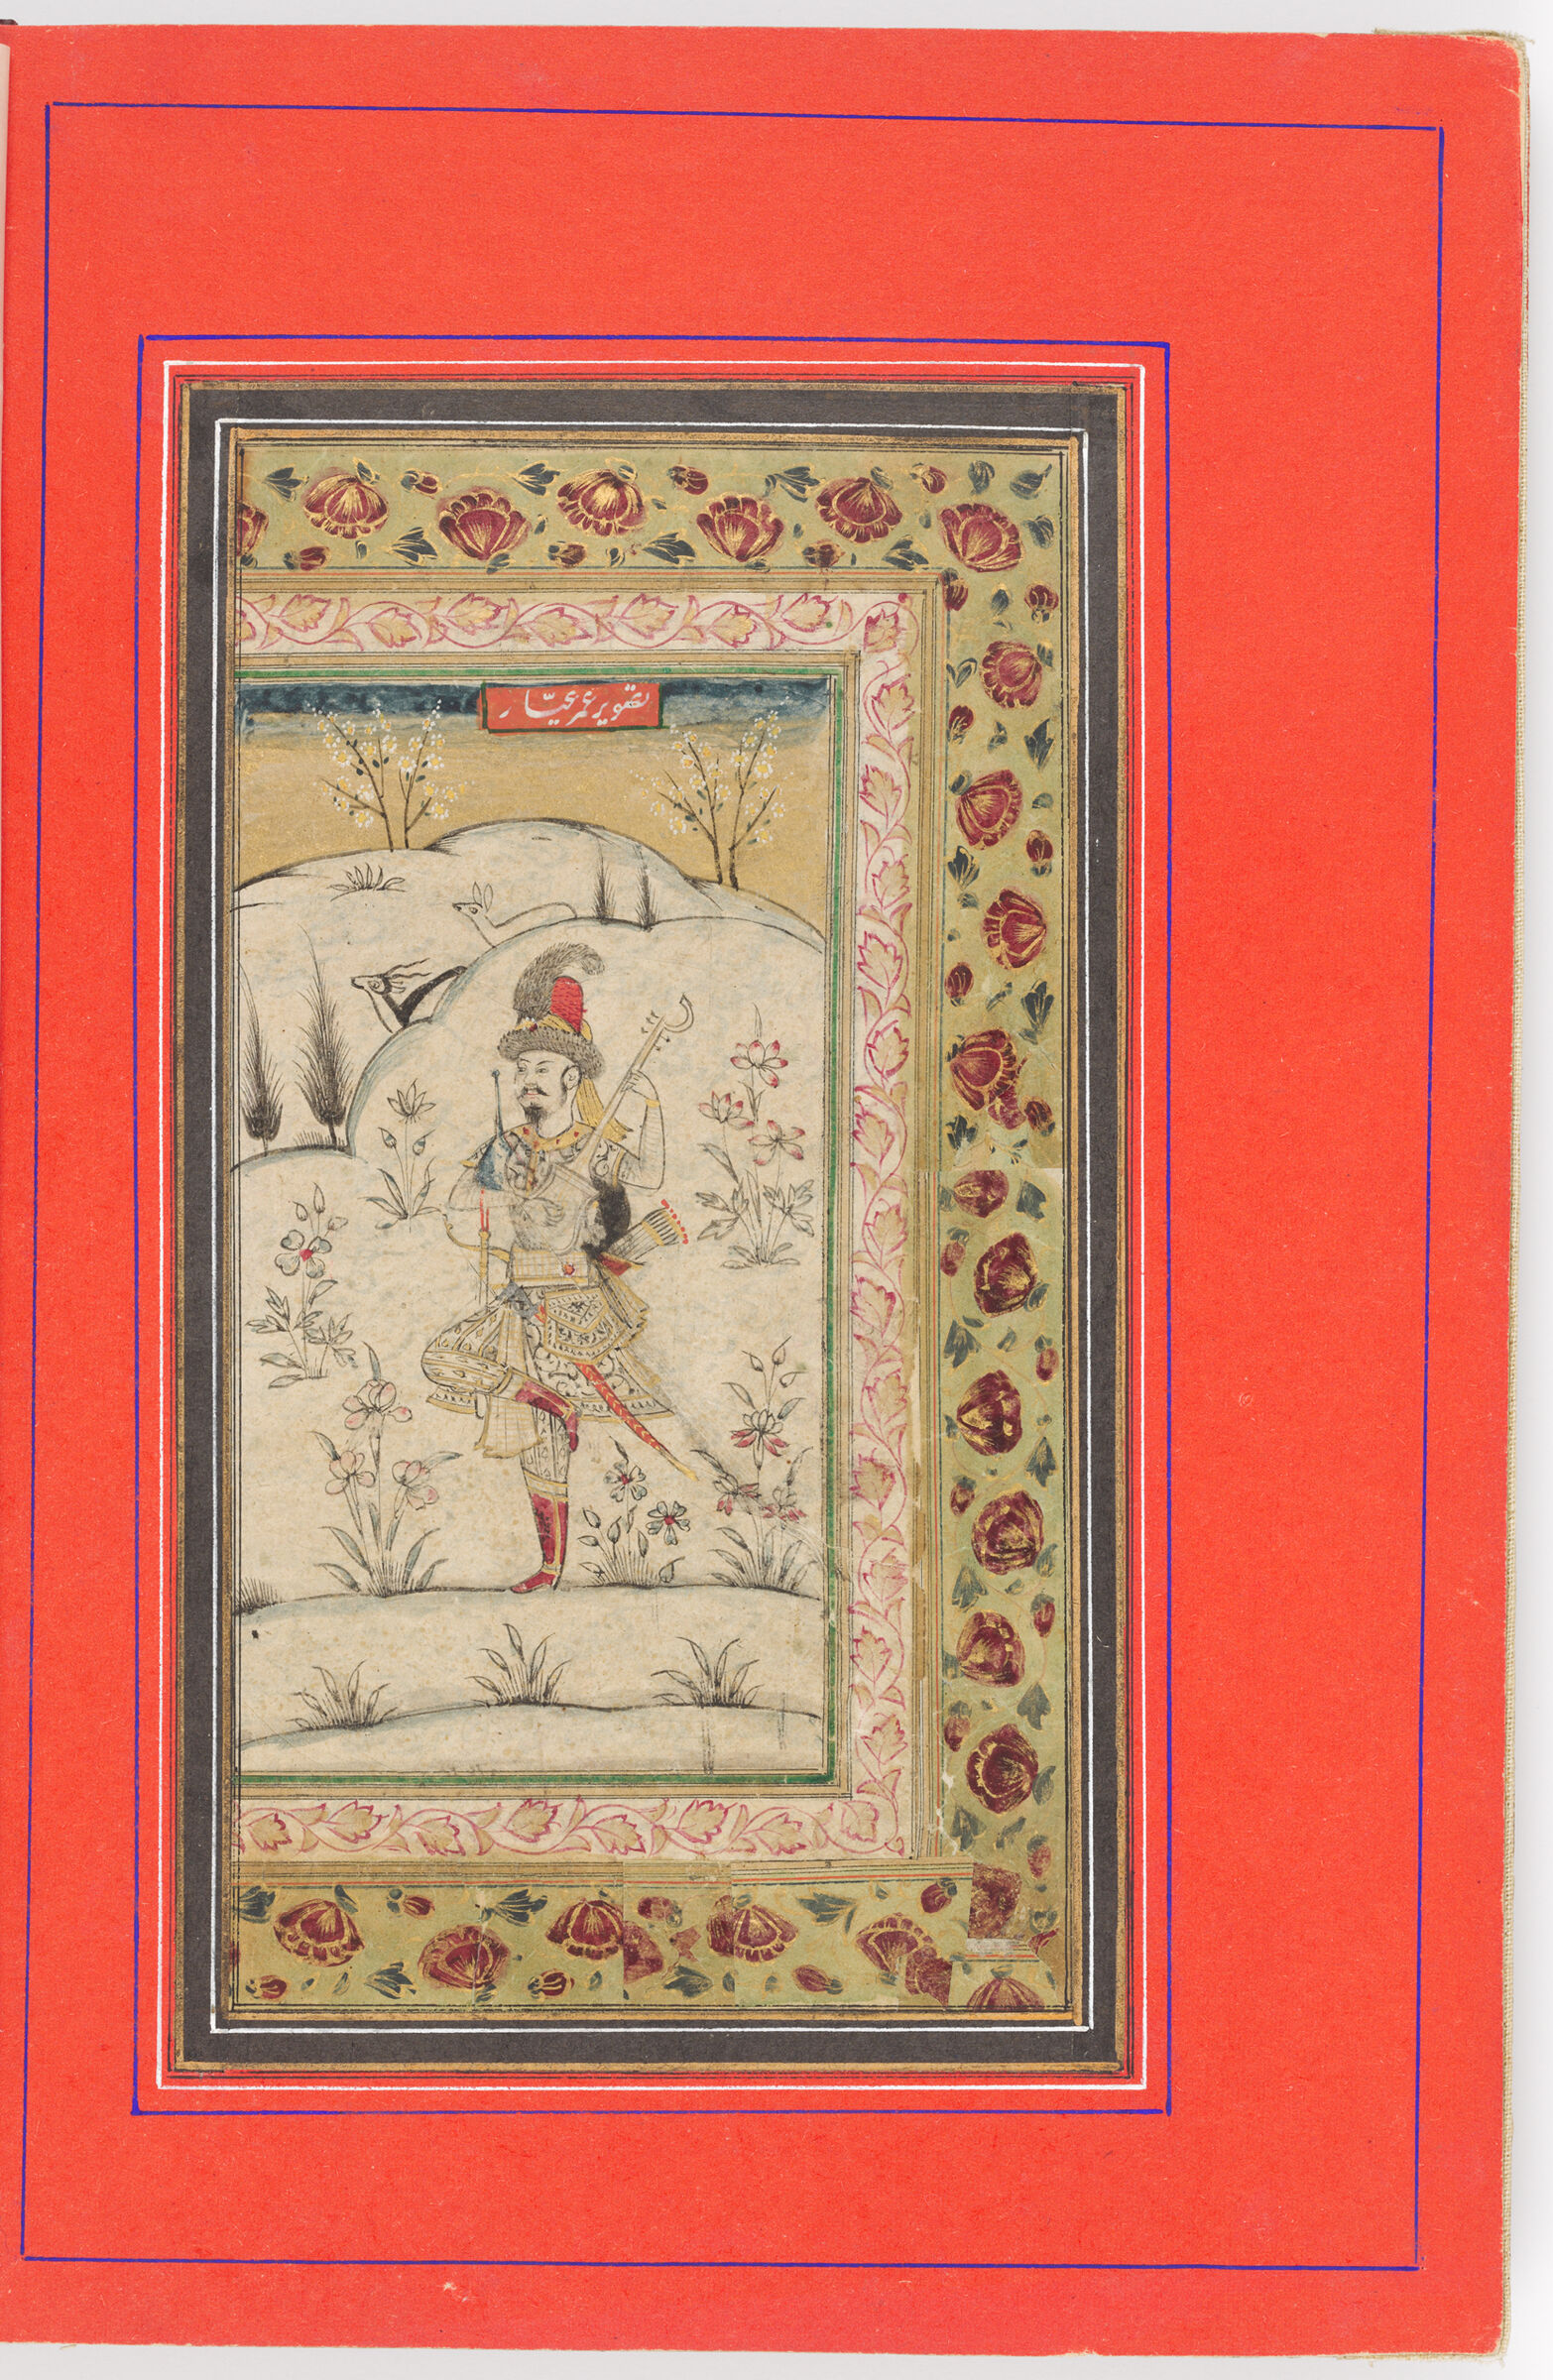 “A Fairy Riding A Magical Stag (Painting Recto Of Folio 2) And “Depiction Of ‘Umar ‘Ayyar (Painting Verso Of Folio 2), Illustrated Folio From An Album Of Illustrations Of Hamzanama”